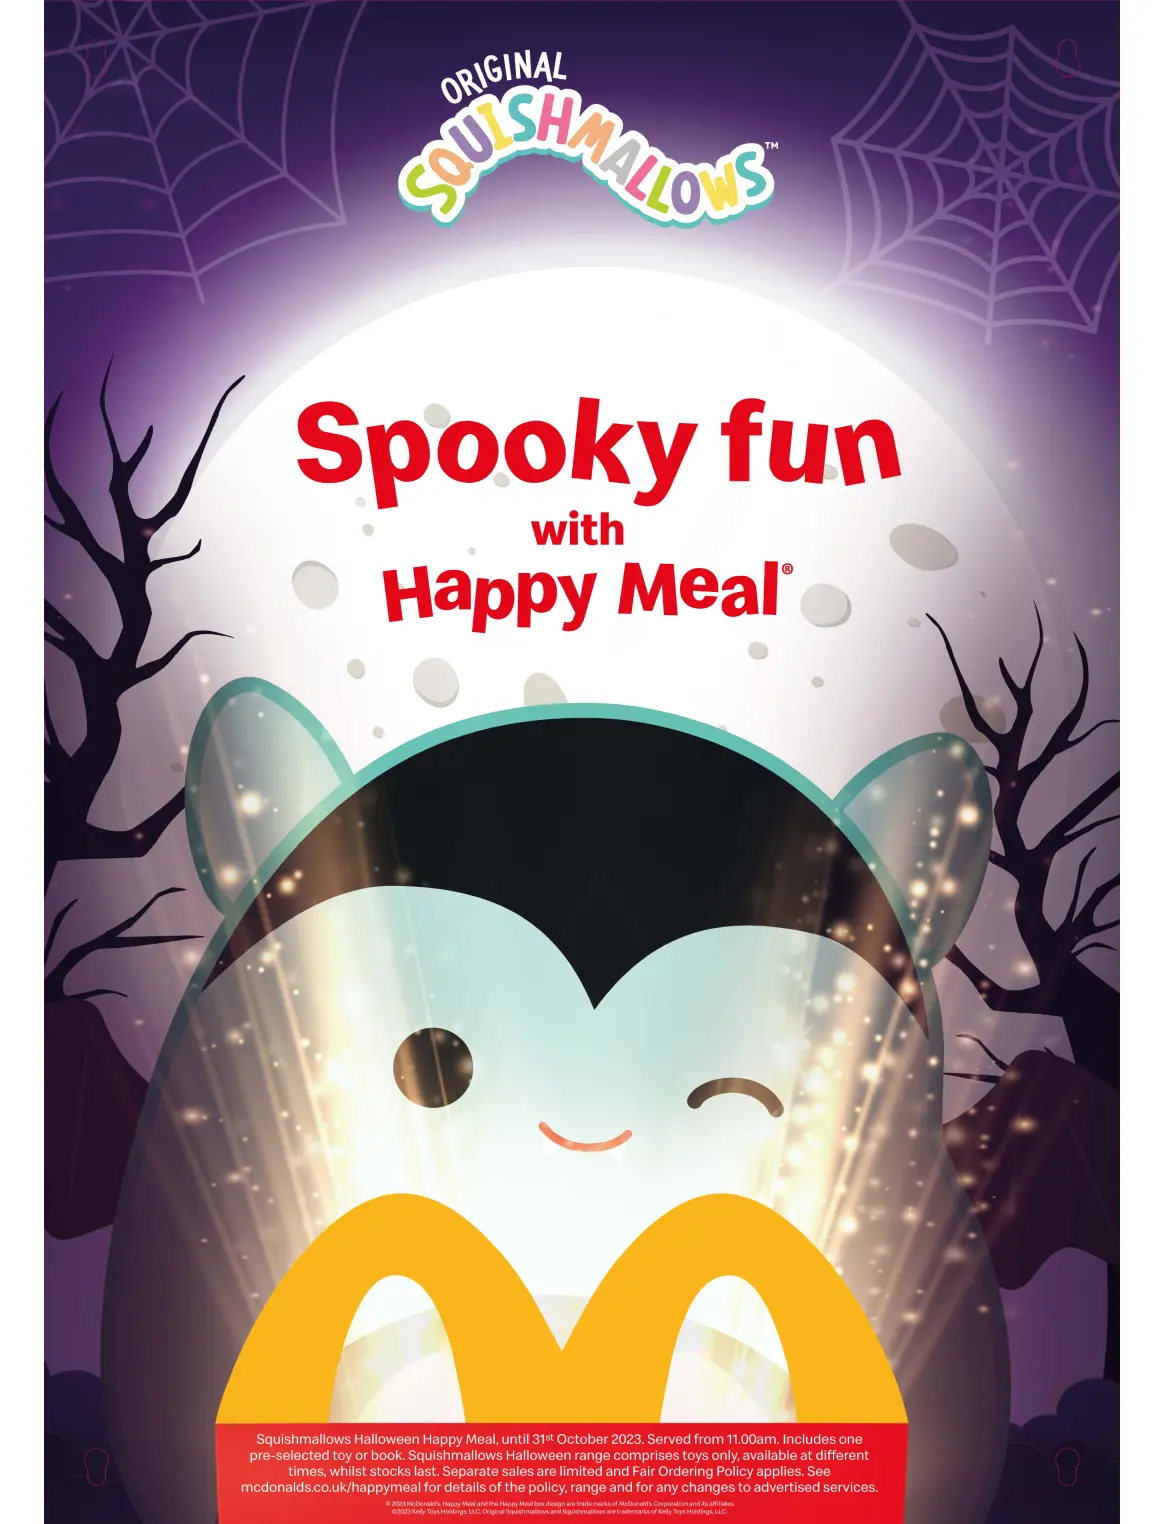 A Squishmallow with a Happy Meal Box and the text "Spooky fun with Happy Meal